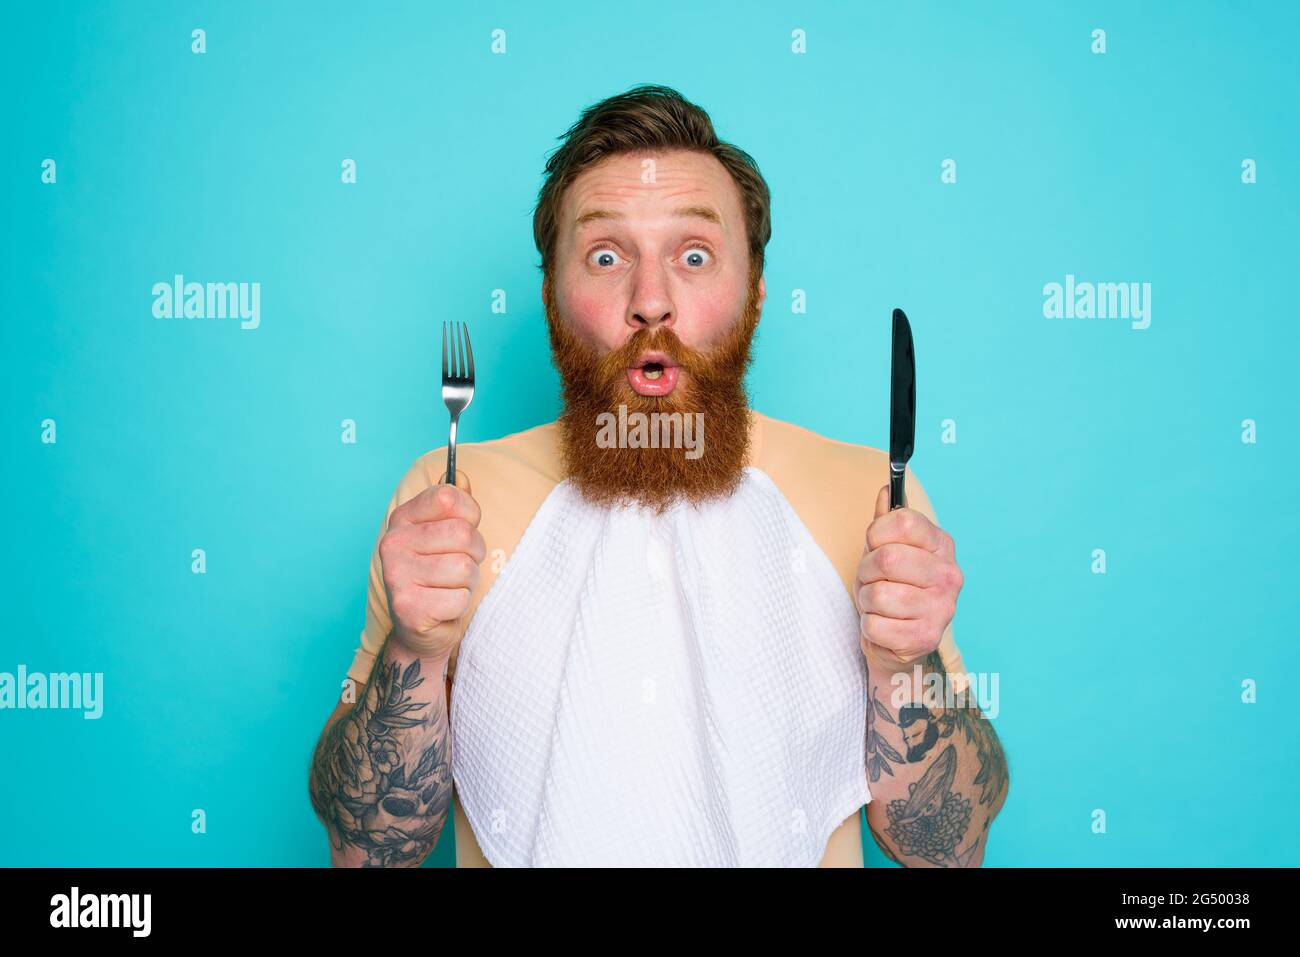 Shocked man with tattoos is ready to eat something with cutlery in hand Stock Photo